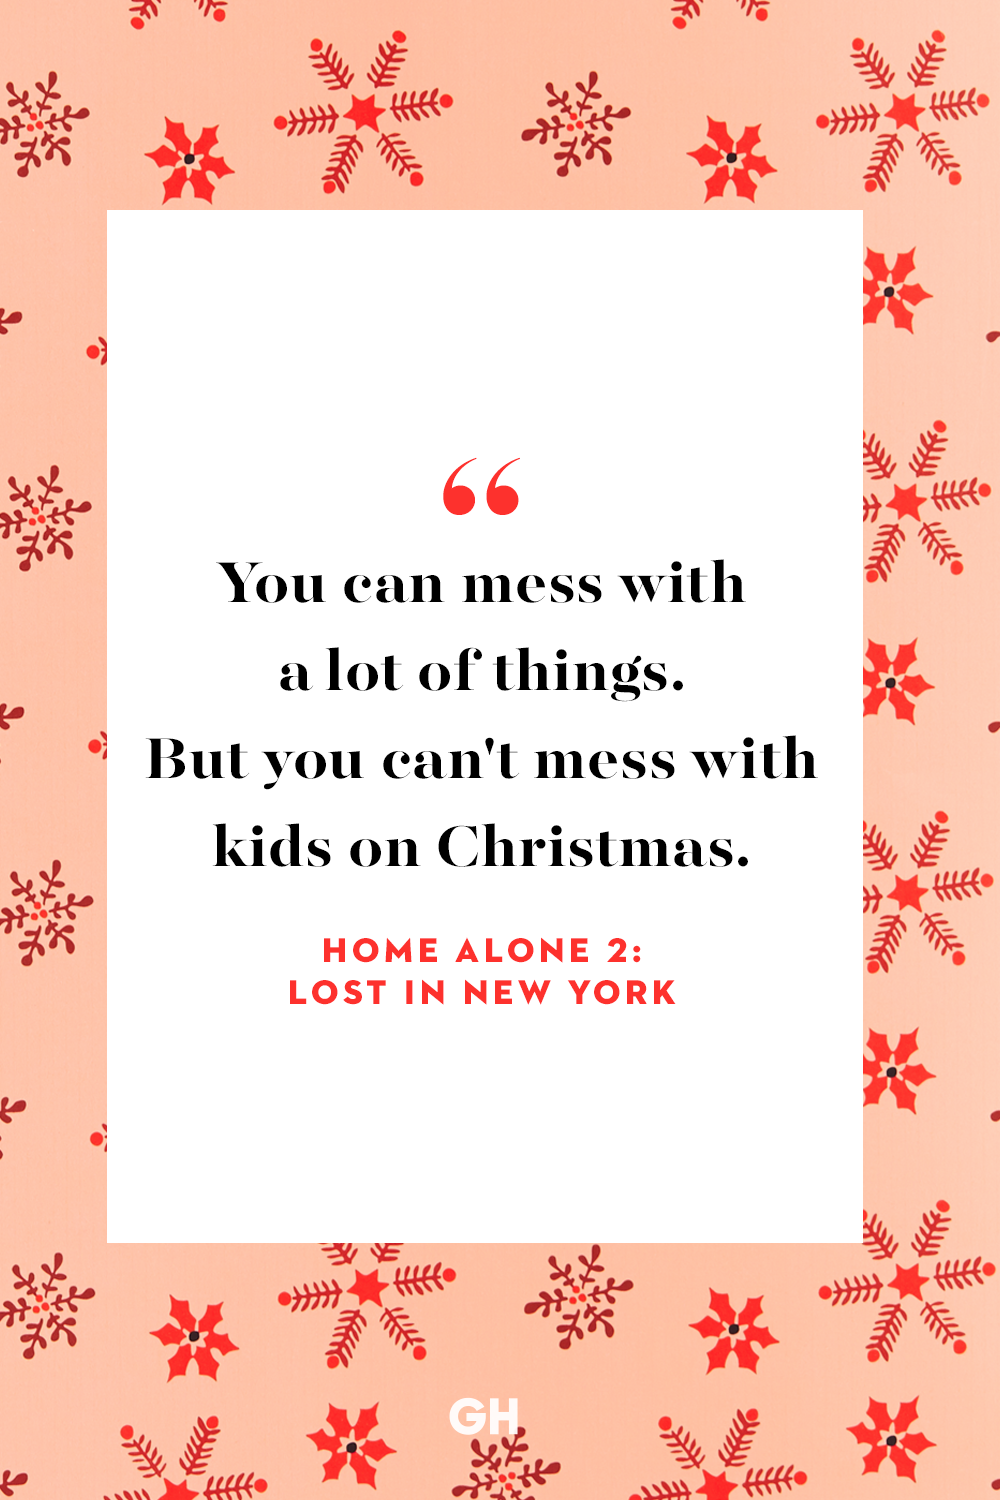 55 Best Christmas Movie Quotes - Famous Christmas Movies Sayings